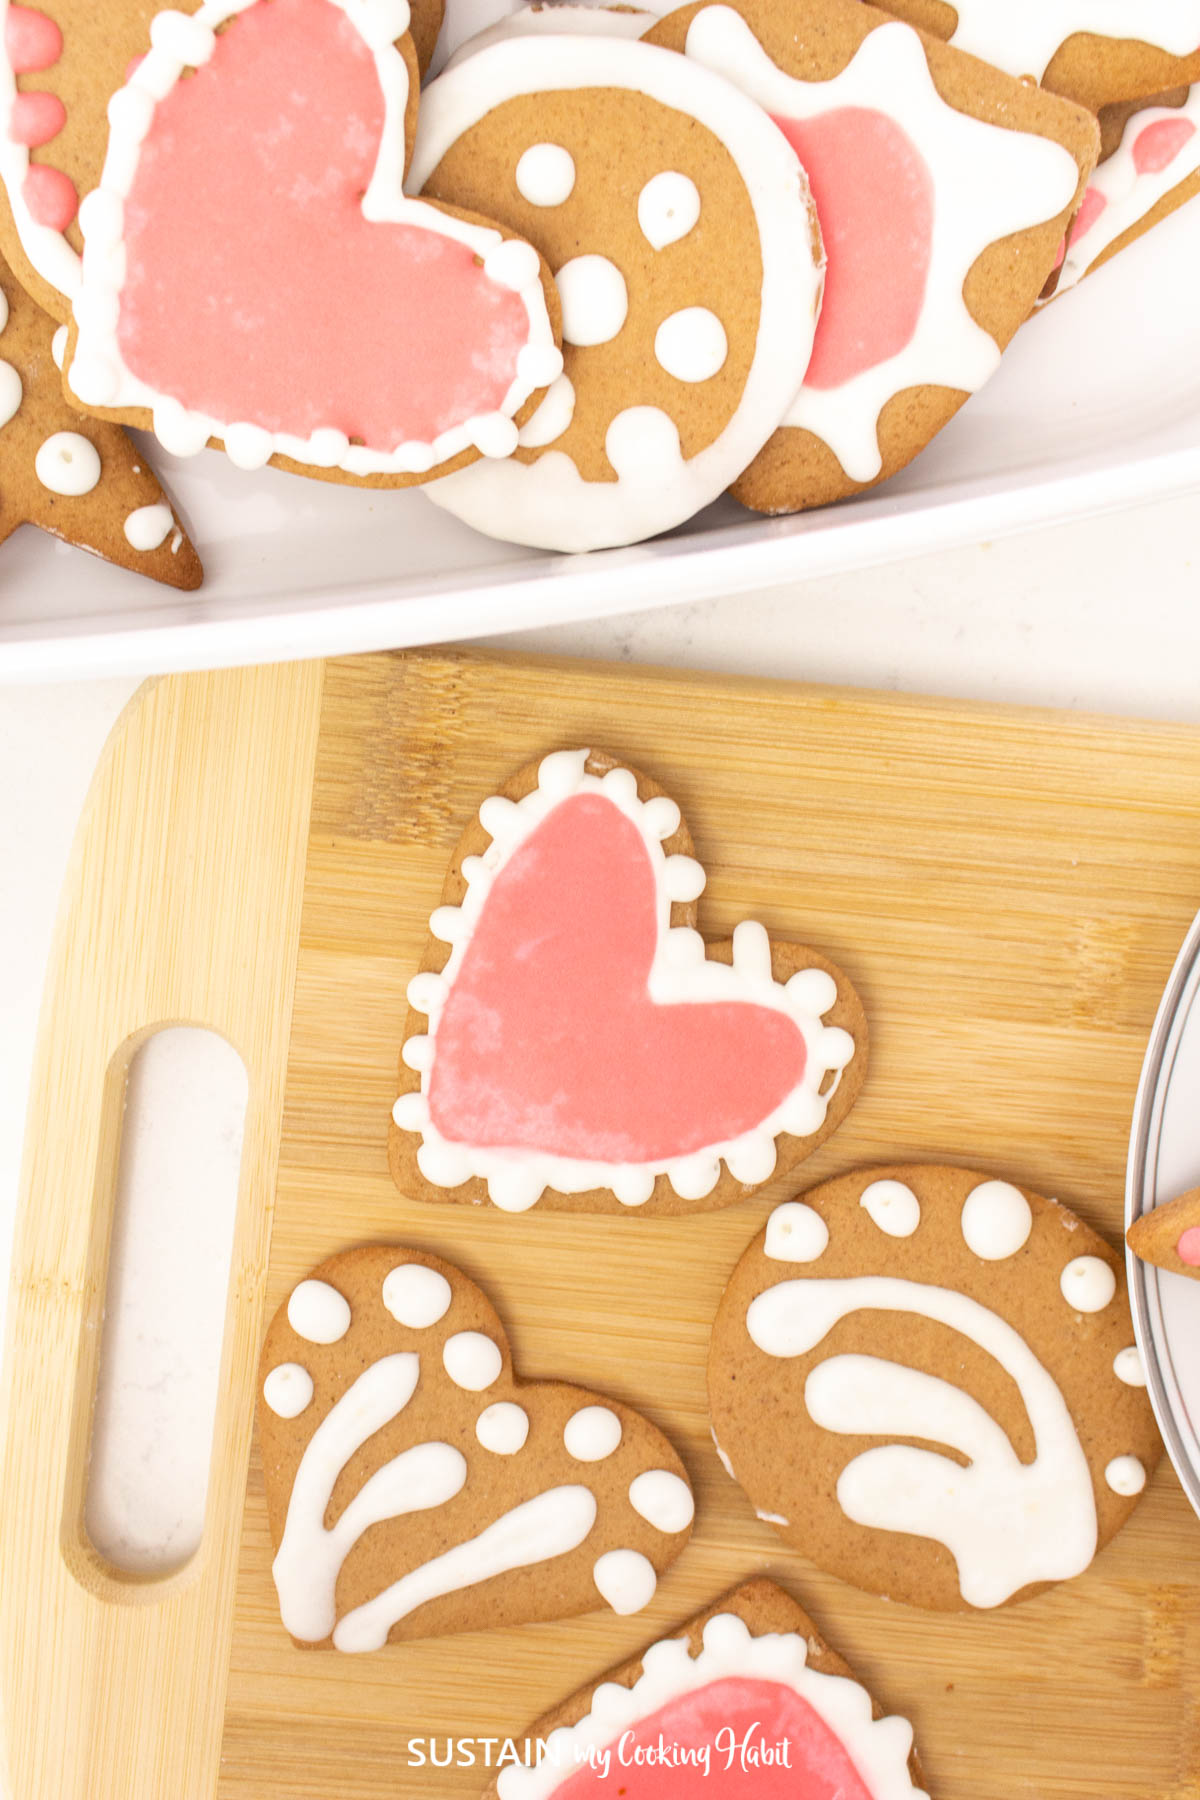 Honey sugar cookiescut into shapes like stars and hearts placed onto a cutting board.